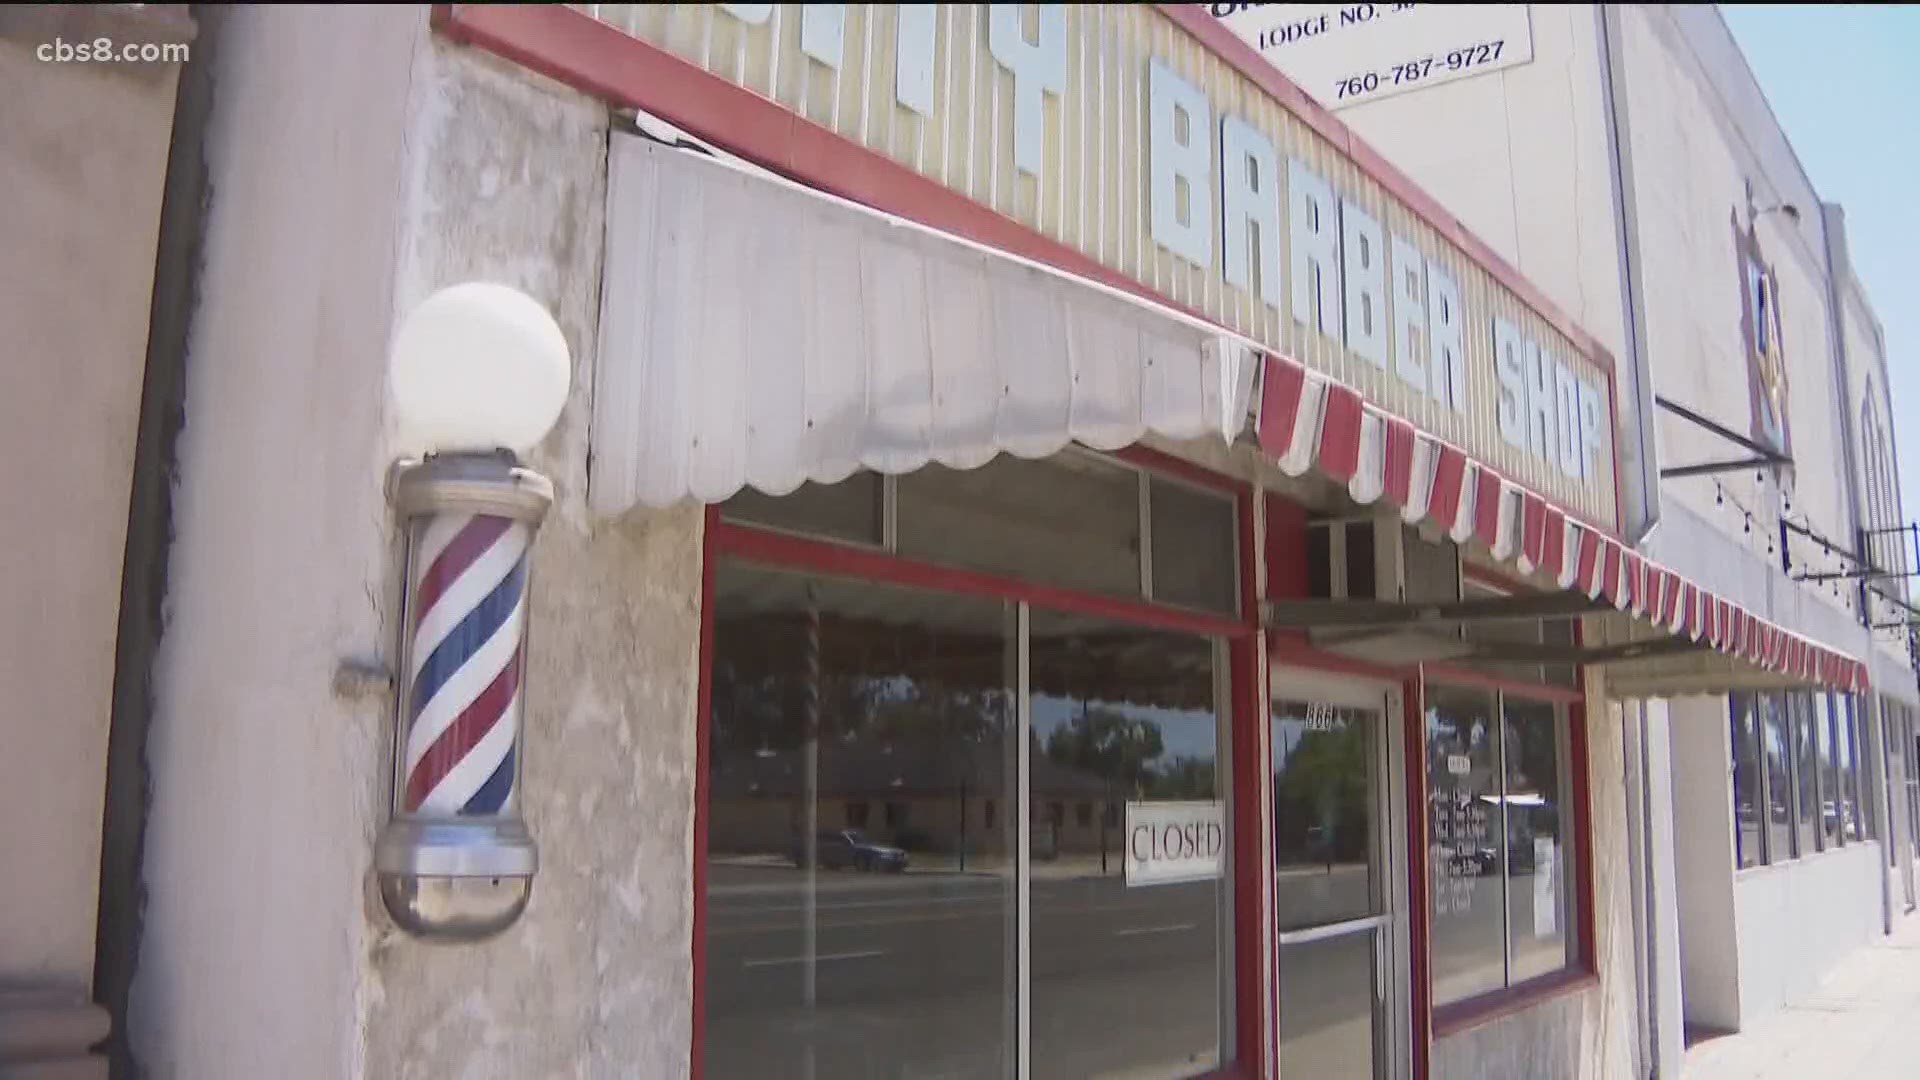 In another move this week, California Governor Gavin Newsom gave hair salons and barbershops the green light to reopen.